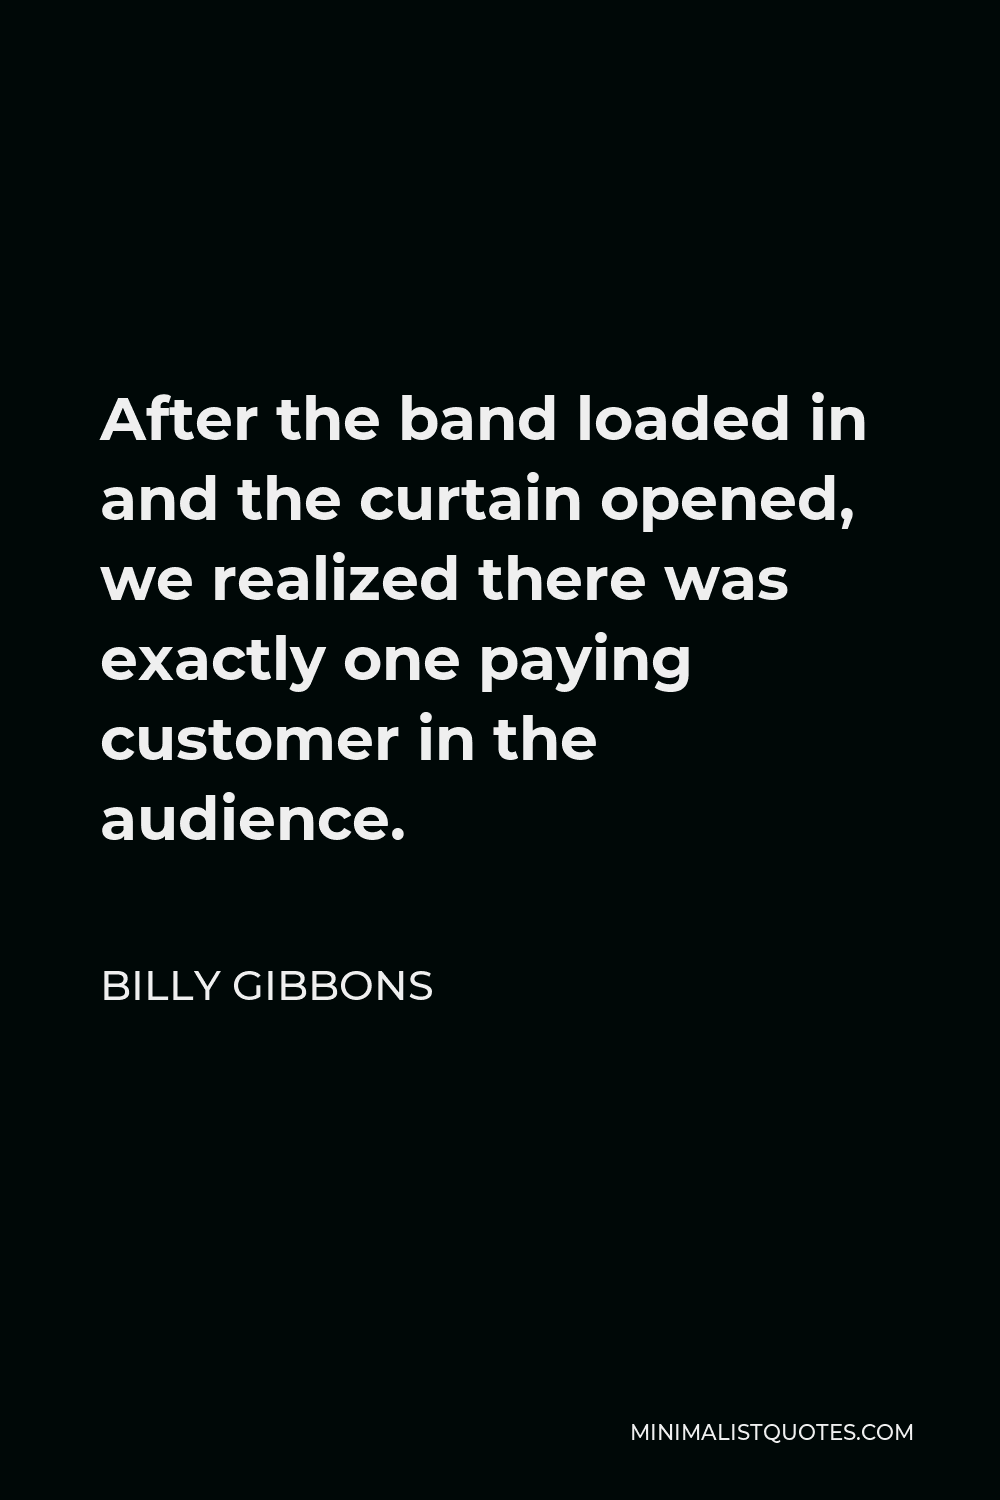 Billy Gibbons Quote - After the band loaded in and the curtain opened, we realized there was exactly one paying customer in the audience.